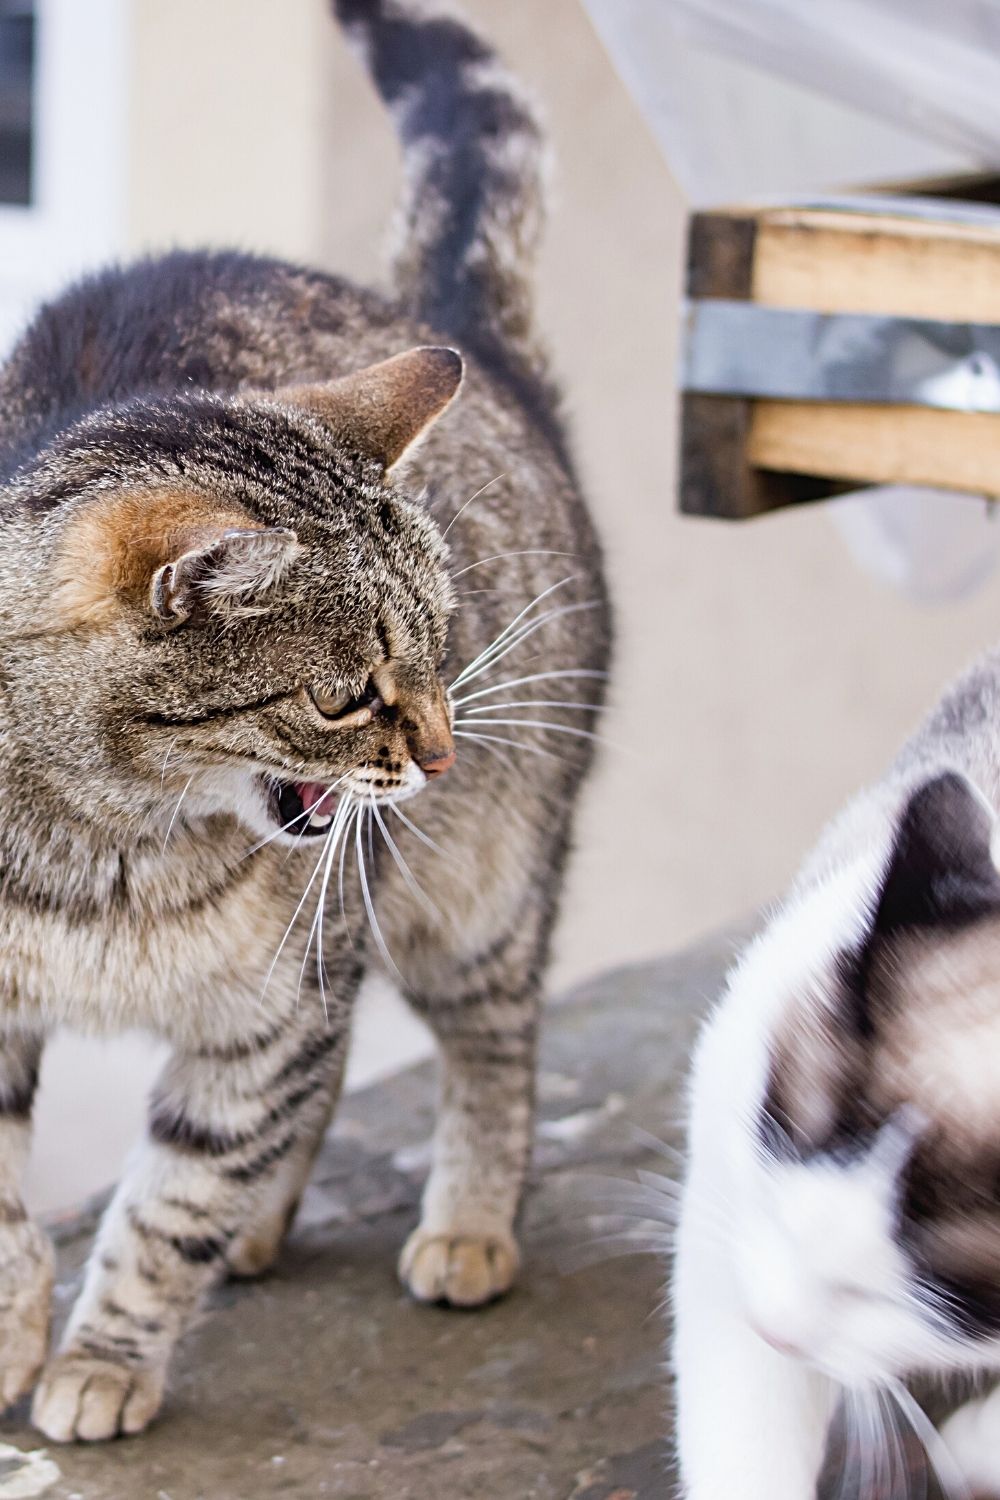 Cats will hiss if they feel threatened by a new cat introduced to them